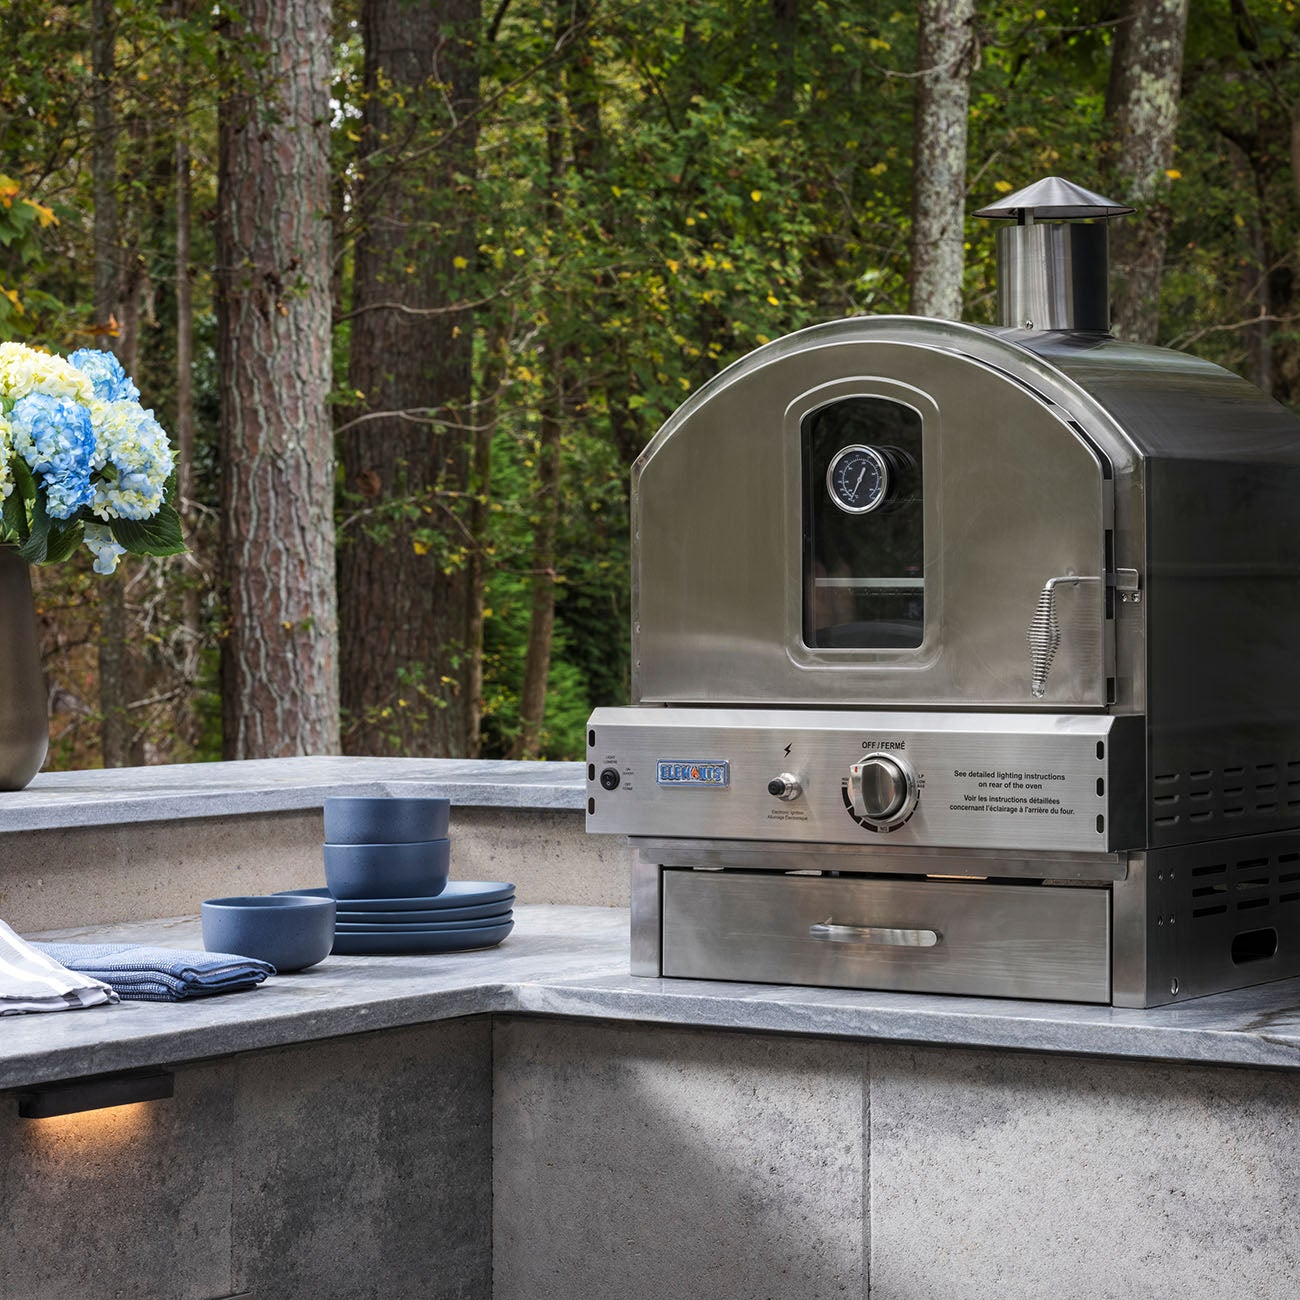 Win a Belgard Elements Outdoor Oven at the Philadelphia Flower Show